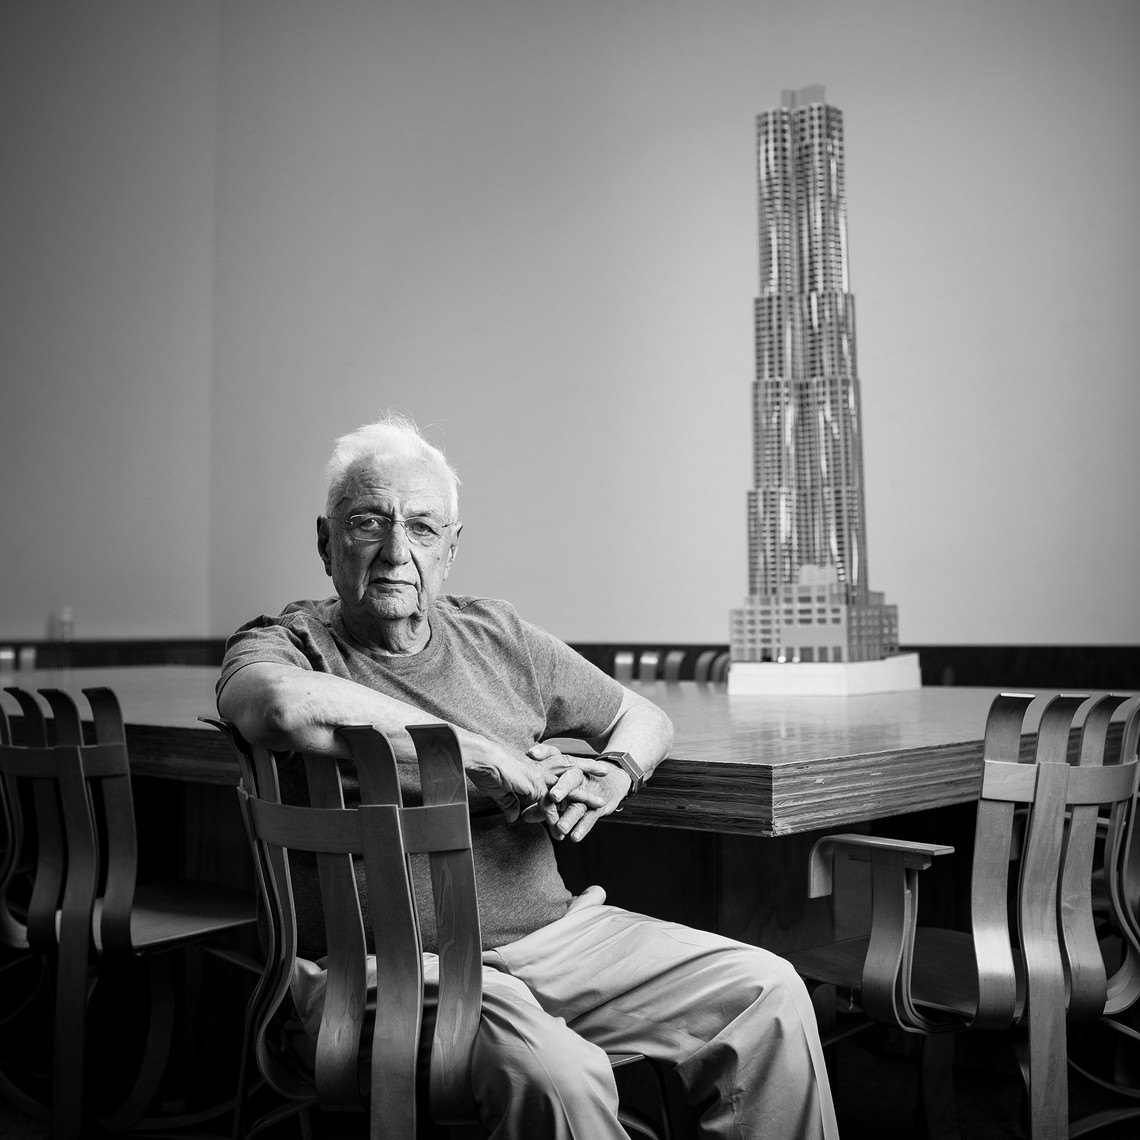 Frank Gehry's Career 'Building Art' Explored in New Book, Chicago News